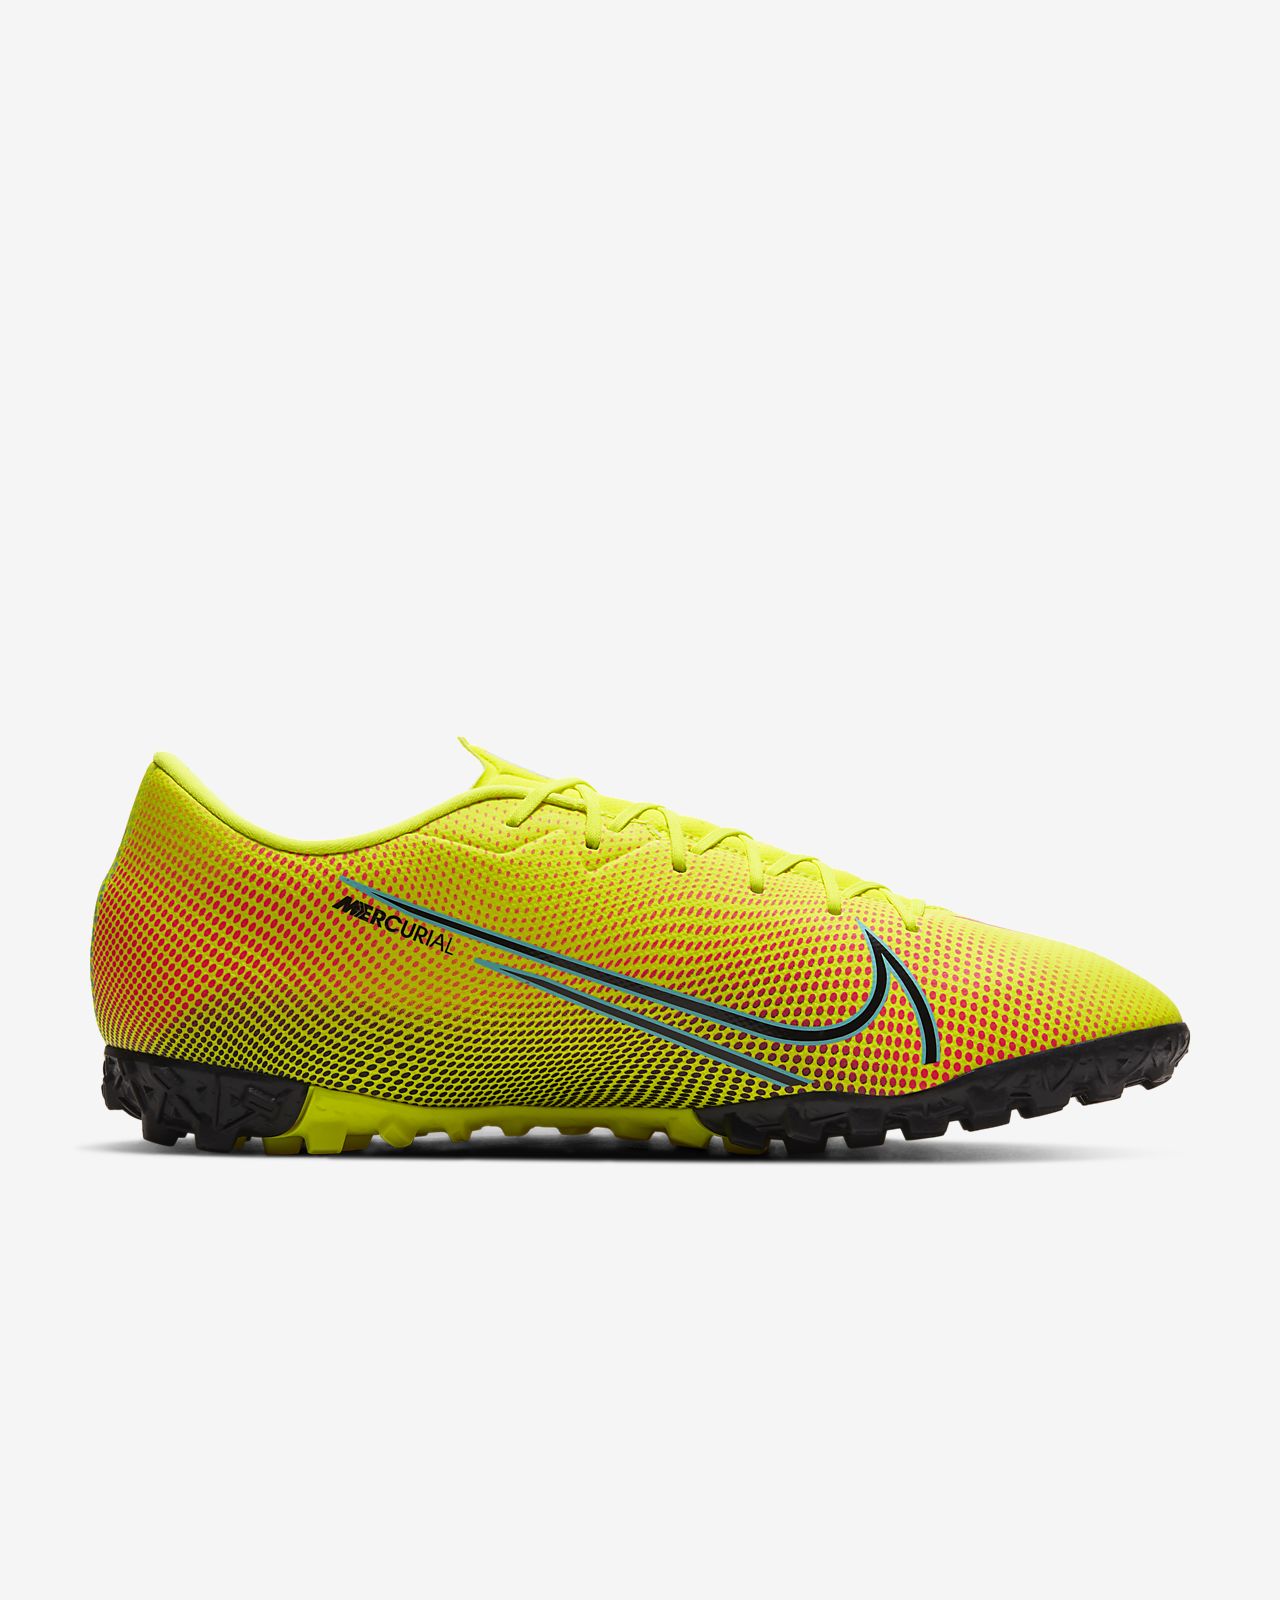 Football boots with different benefits Control Dream Speed Power .